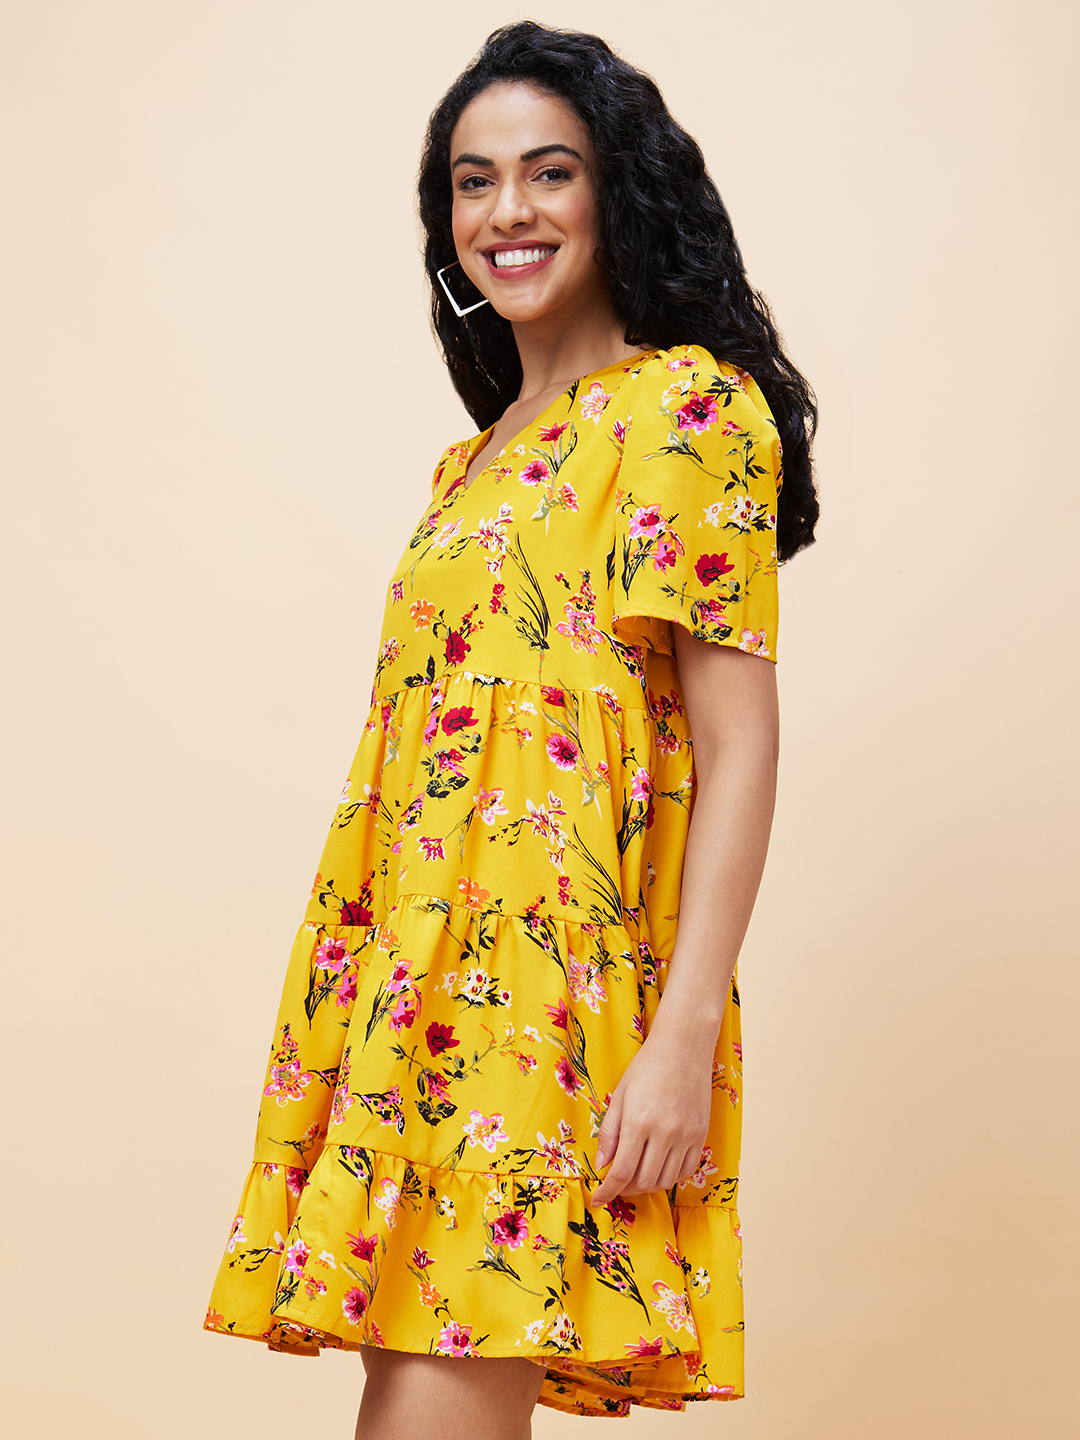 Globus Women Yellow Floral Print V-Neck Casual Loose Fit A-Line Dress